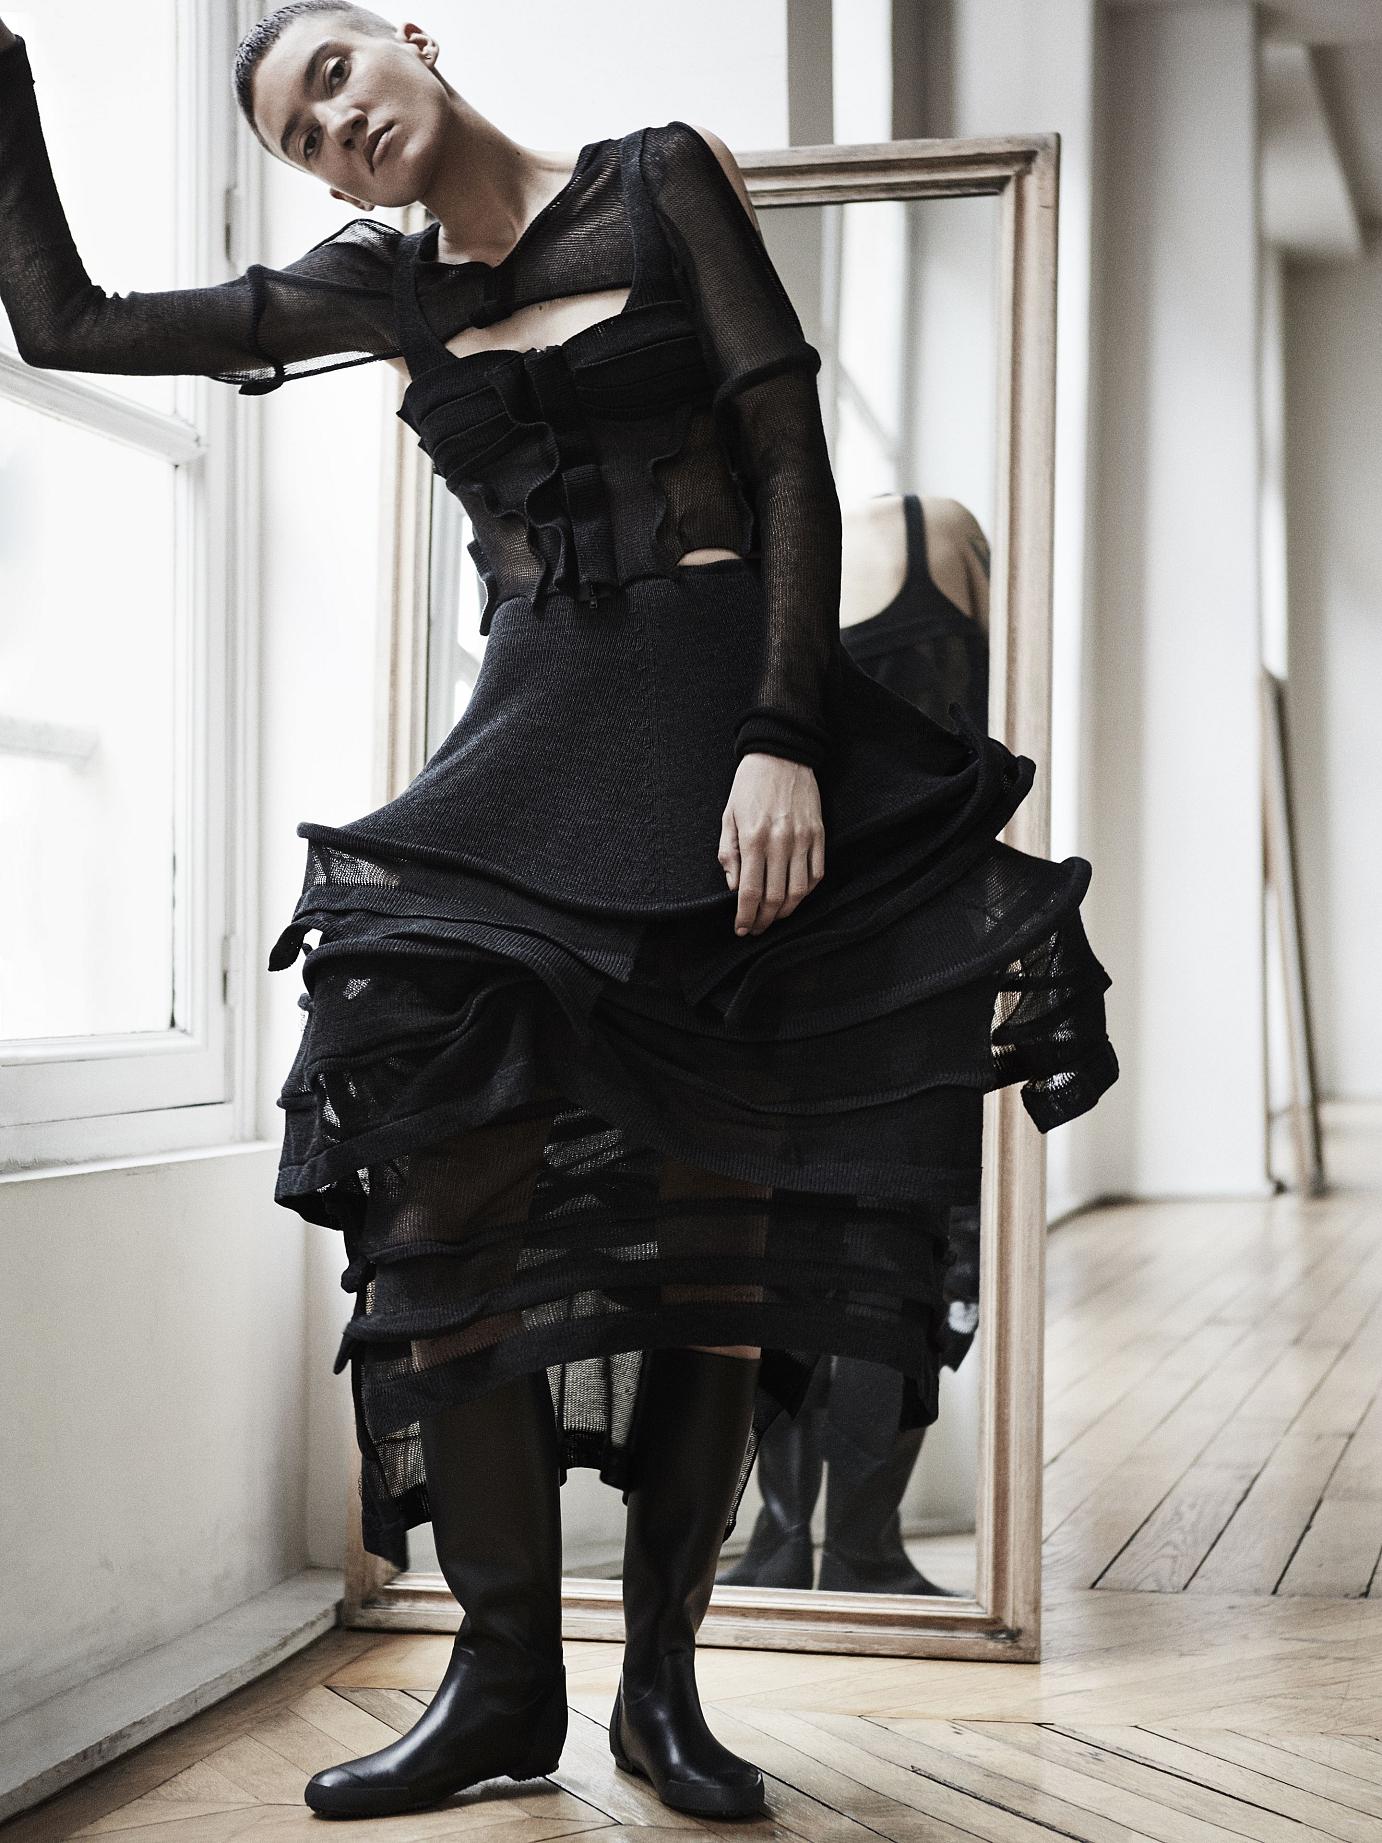 CoqCreative power by ProductionLink s.r.l. V-Mag---Yohji-Yamamoto-On-Influence-And-Androgyny V-Mag---Yohji-Yamamoto-On-Influence-And-Androgyny  V-Mag---Yohji-Yamamoto-On-Influence-And-Androgyny